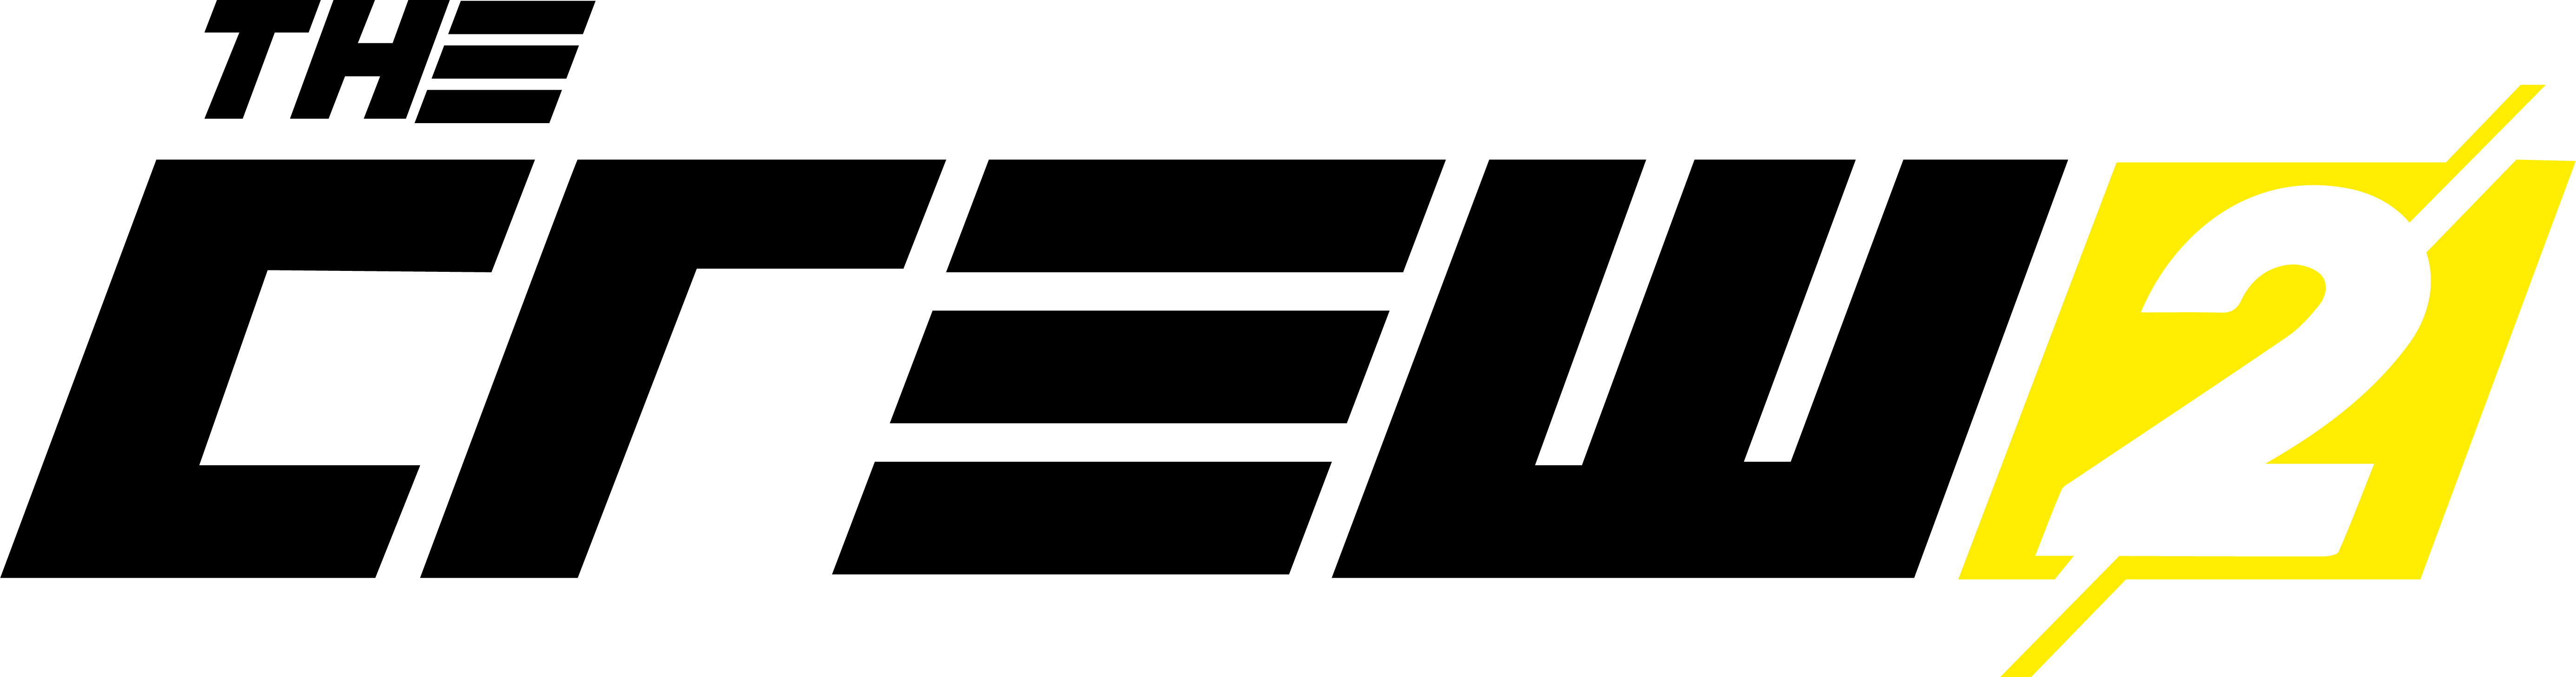 The Crew 2 Logo PNG Image for Free Download